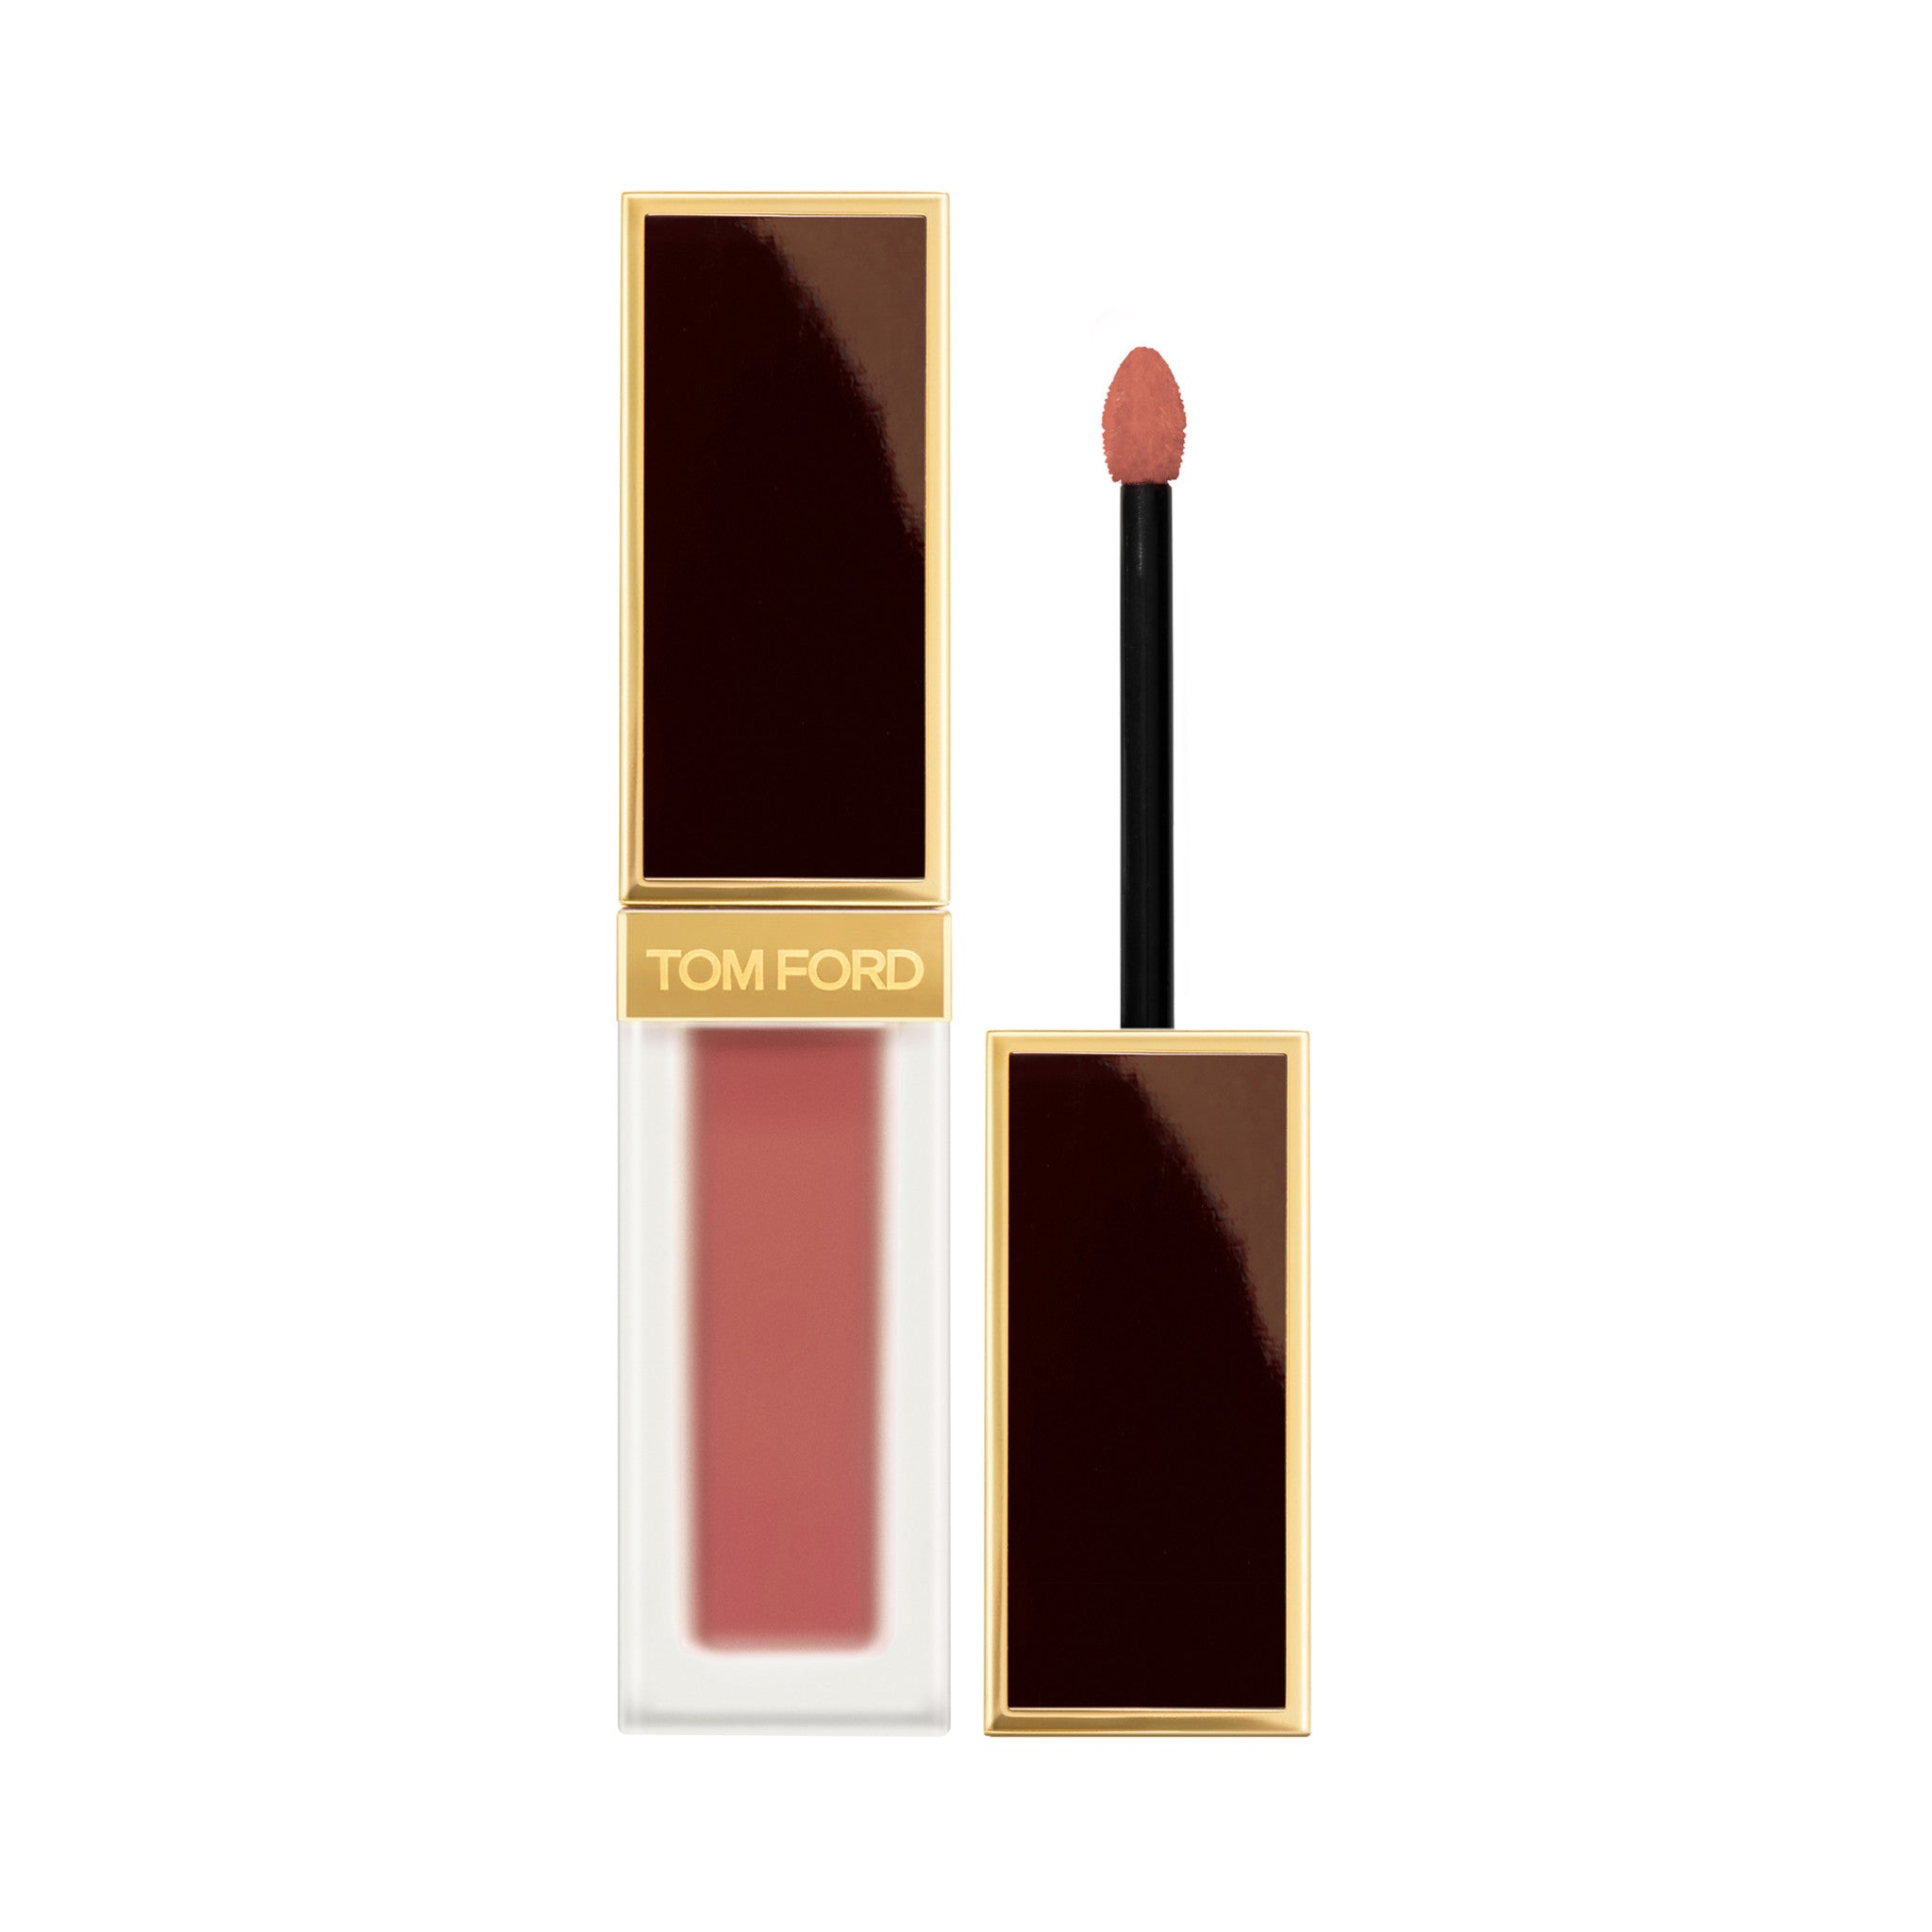 Tom Ford Liquid Lip Luxe Matte Color/Shade variant: Naked Haze main image.